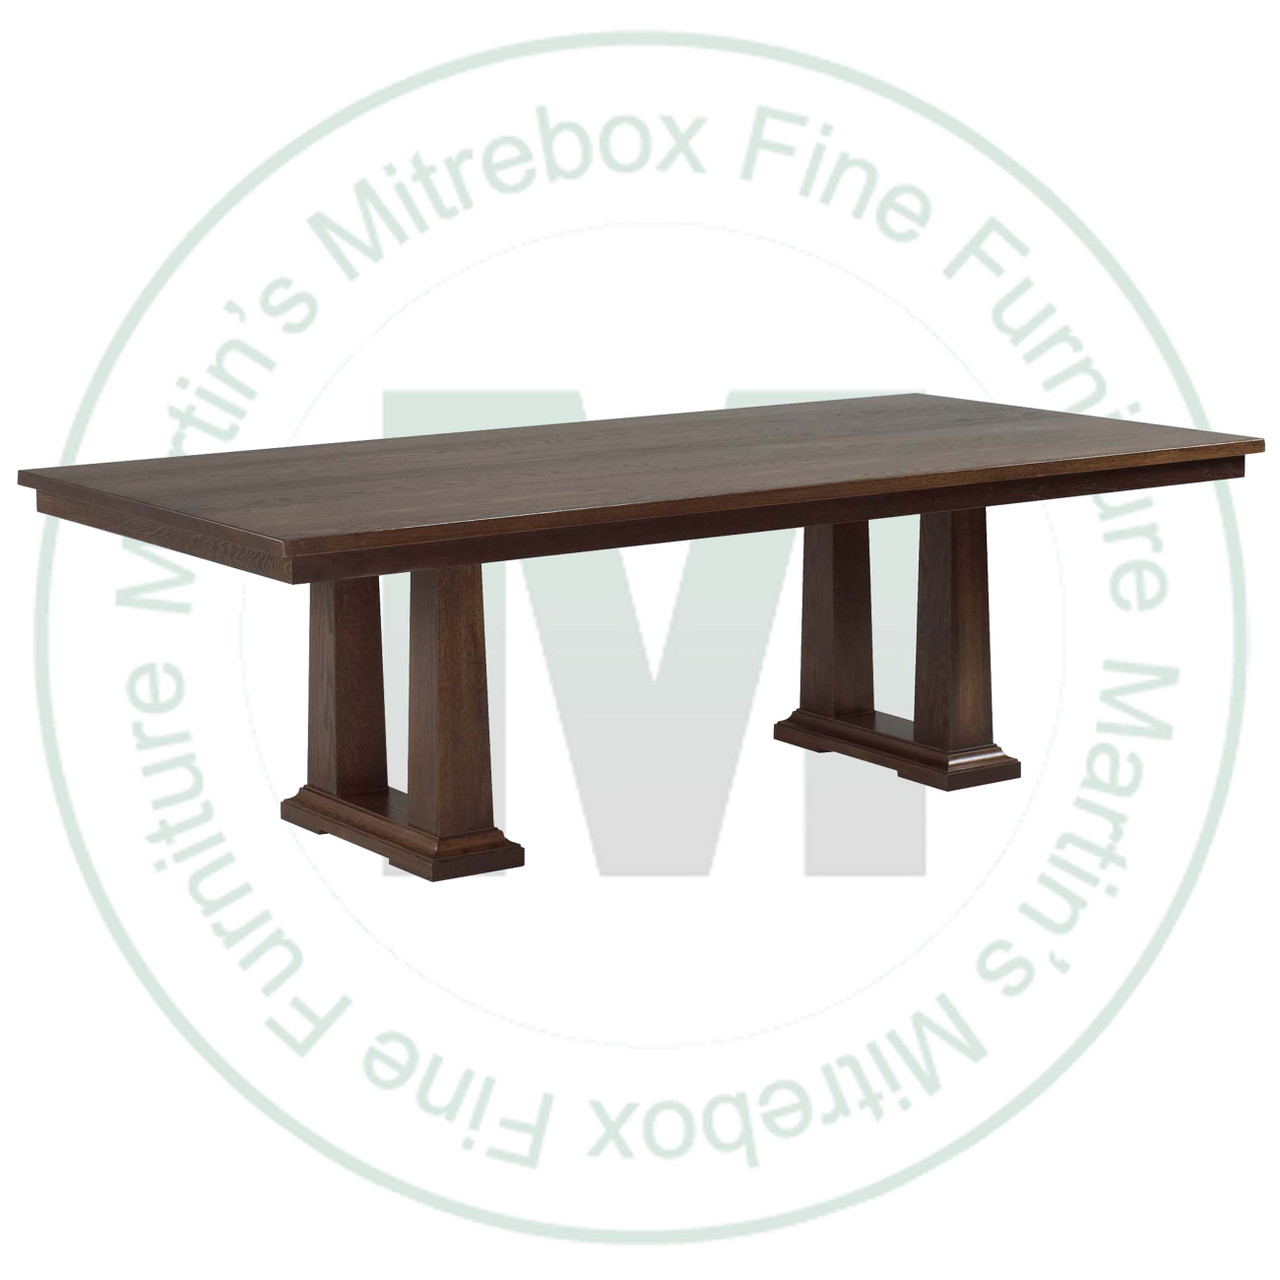 Maple Acropolis Extension Double Pedestal Table 42''D x 84''W x 30''H With 2 - 12'' Leaves Table Has 1.25'' Thick Top